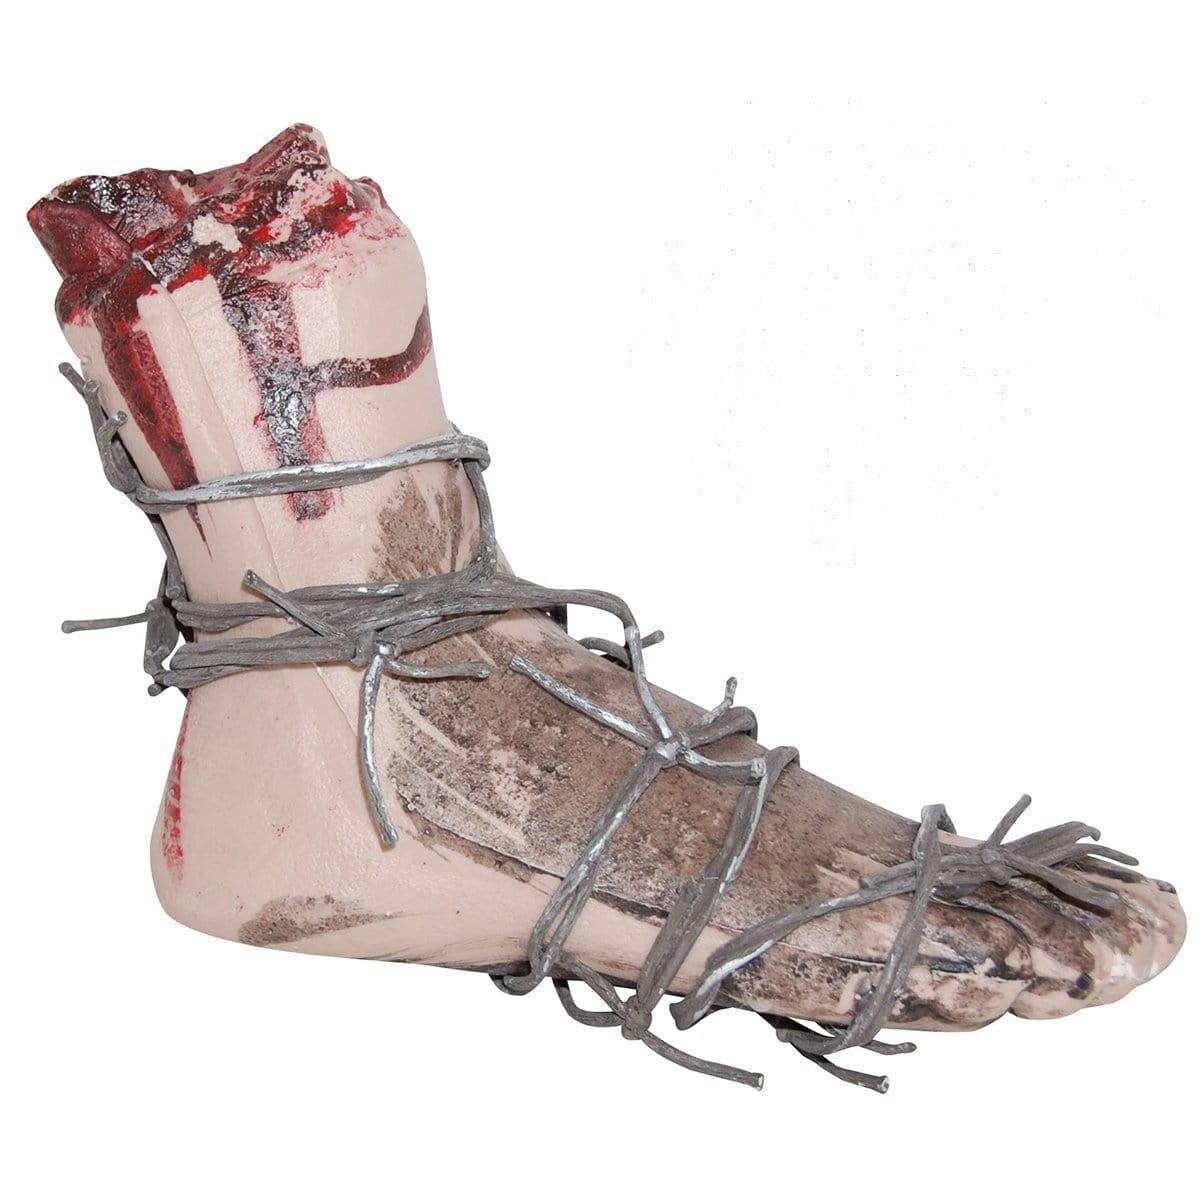 Buy Halloween Foot with barbed wire sold at Party Expert